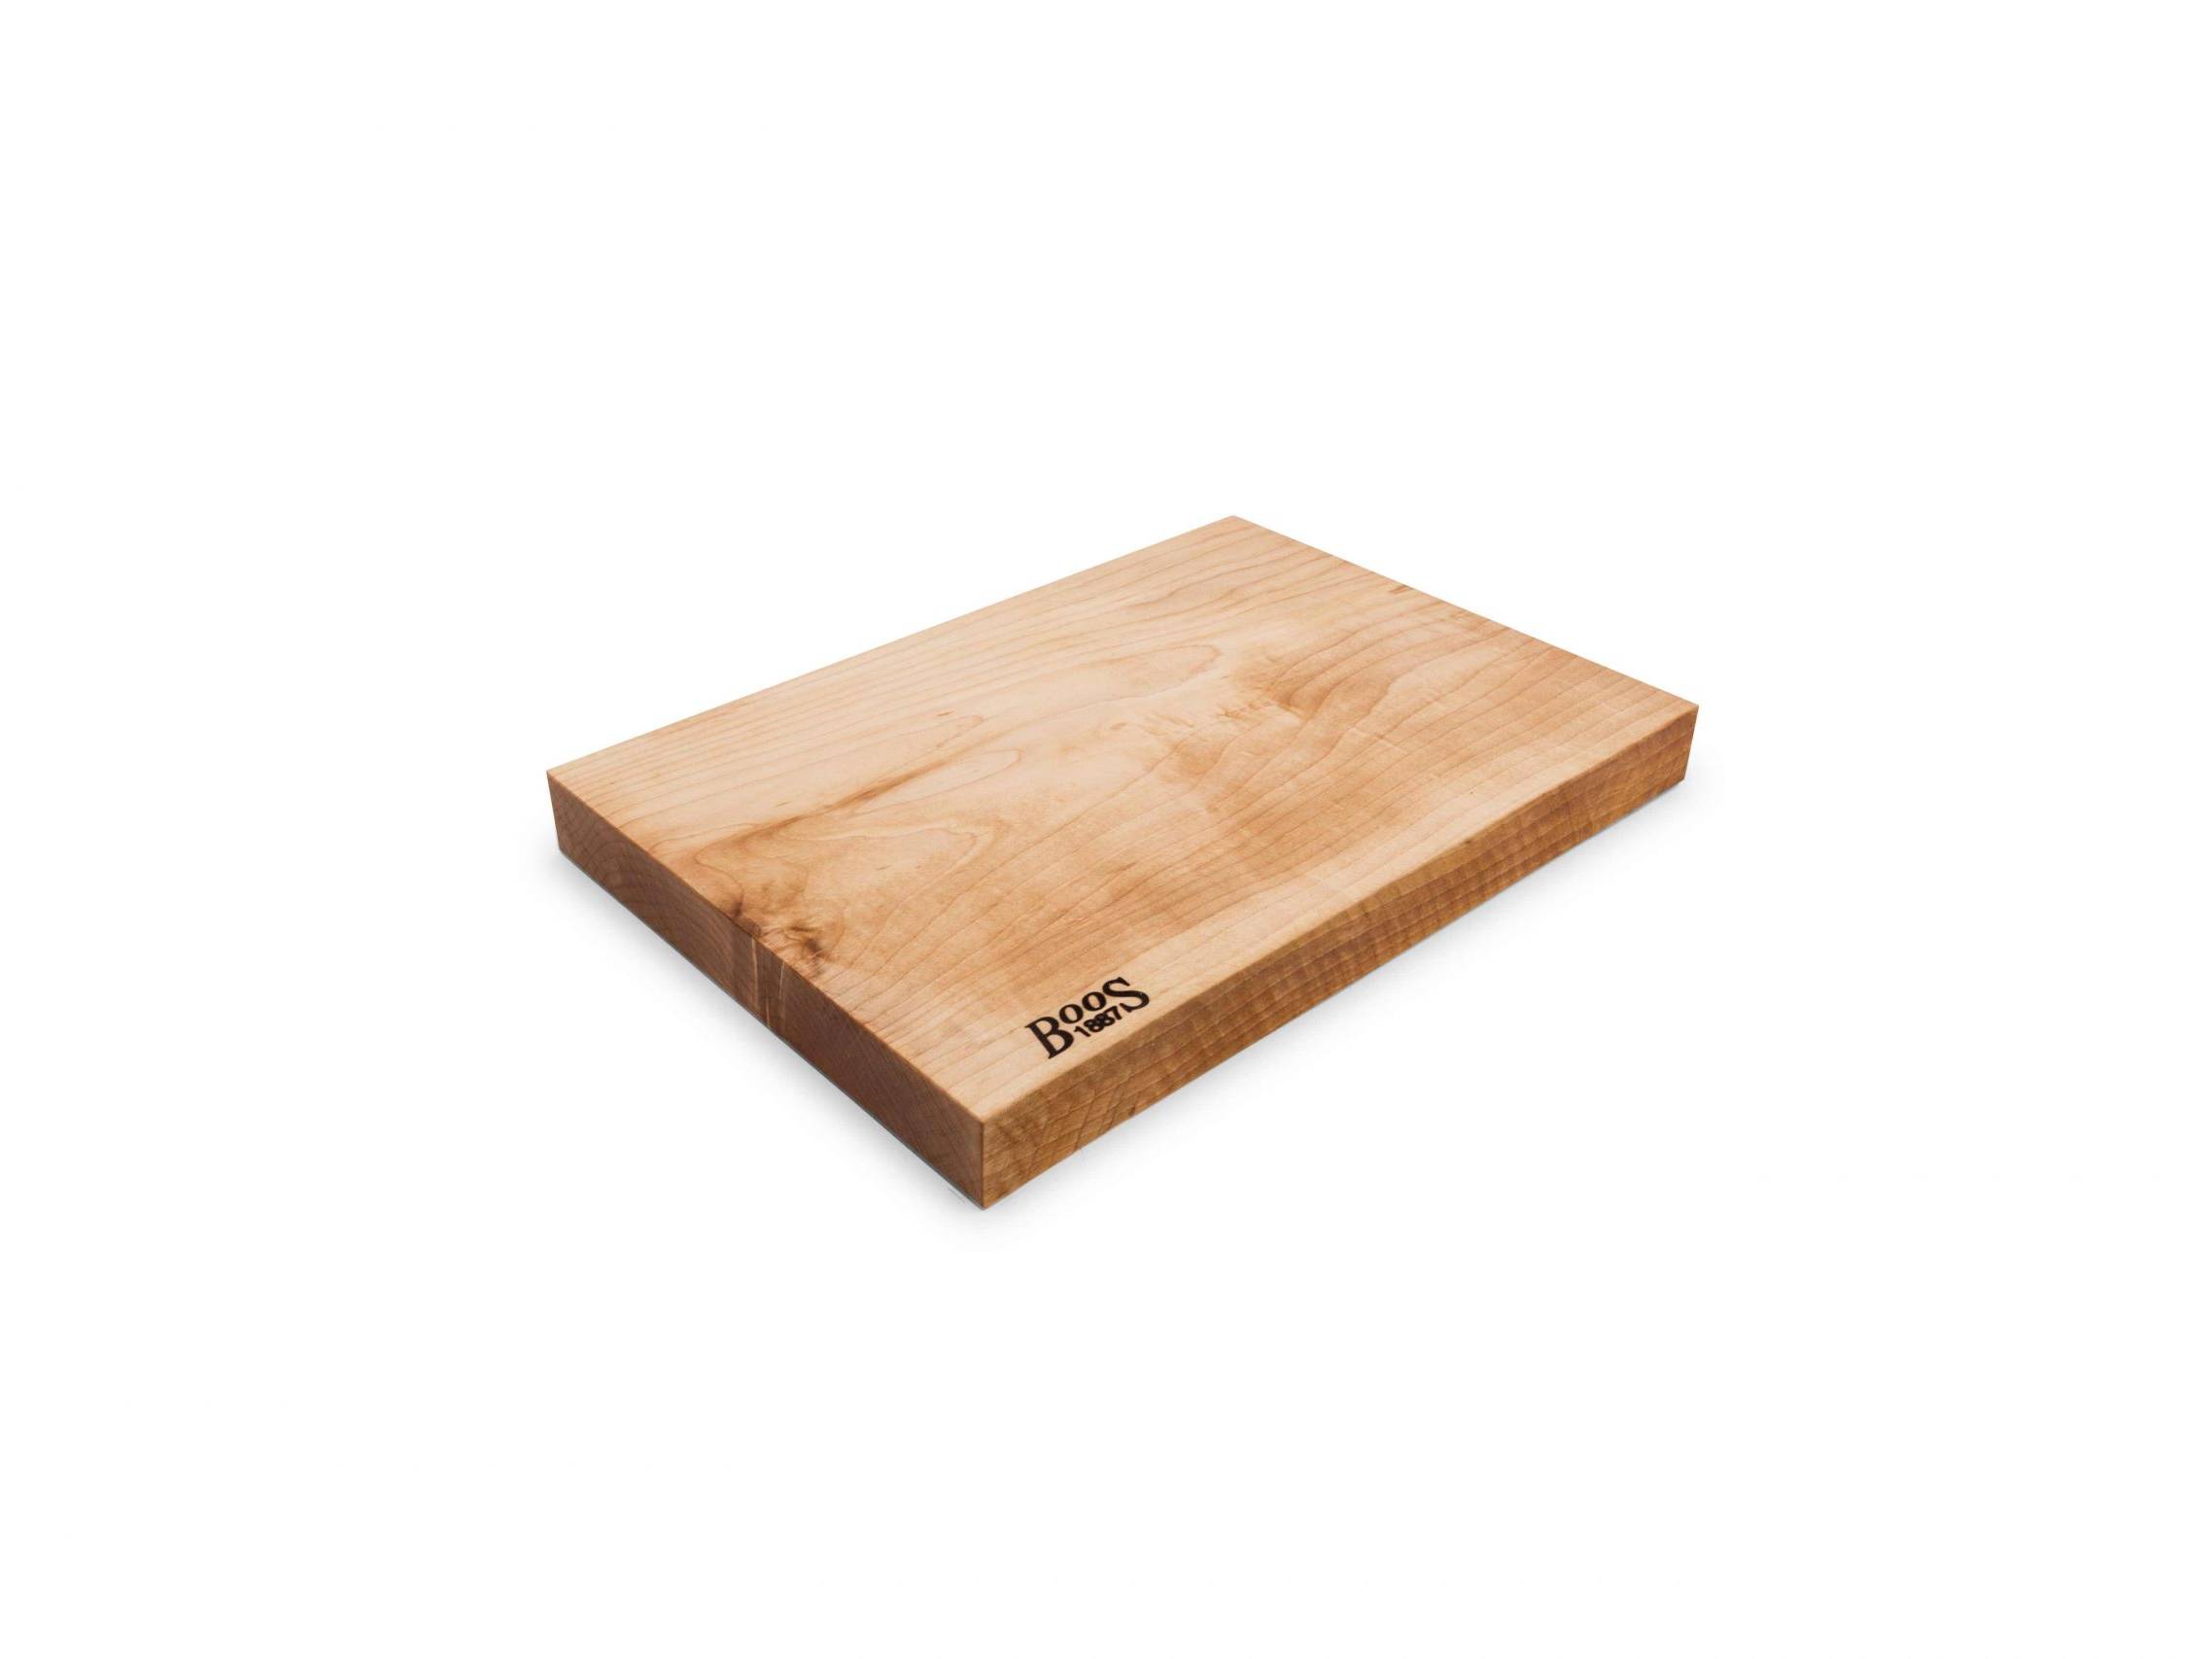 Boos 1887 / Rustic Edge one piece cutting board; hard maple; can be used on both sides 37